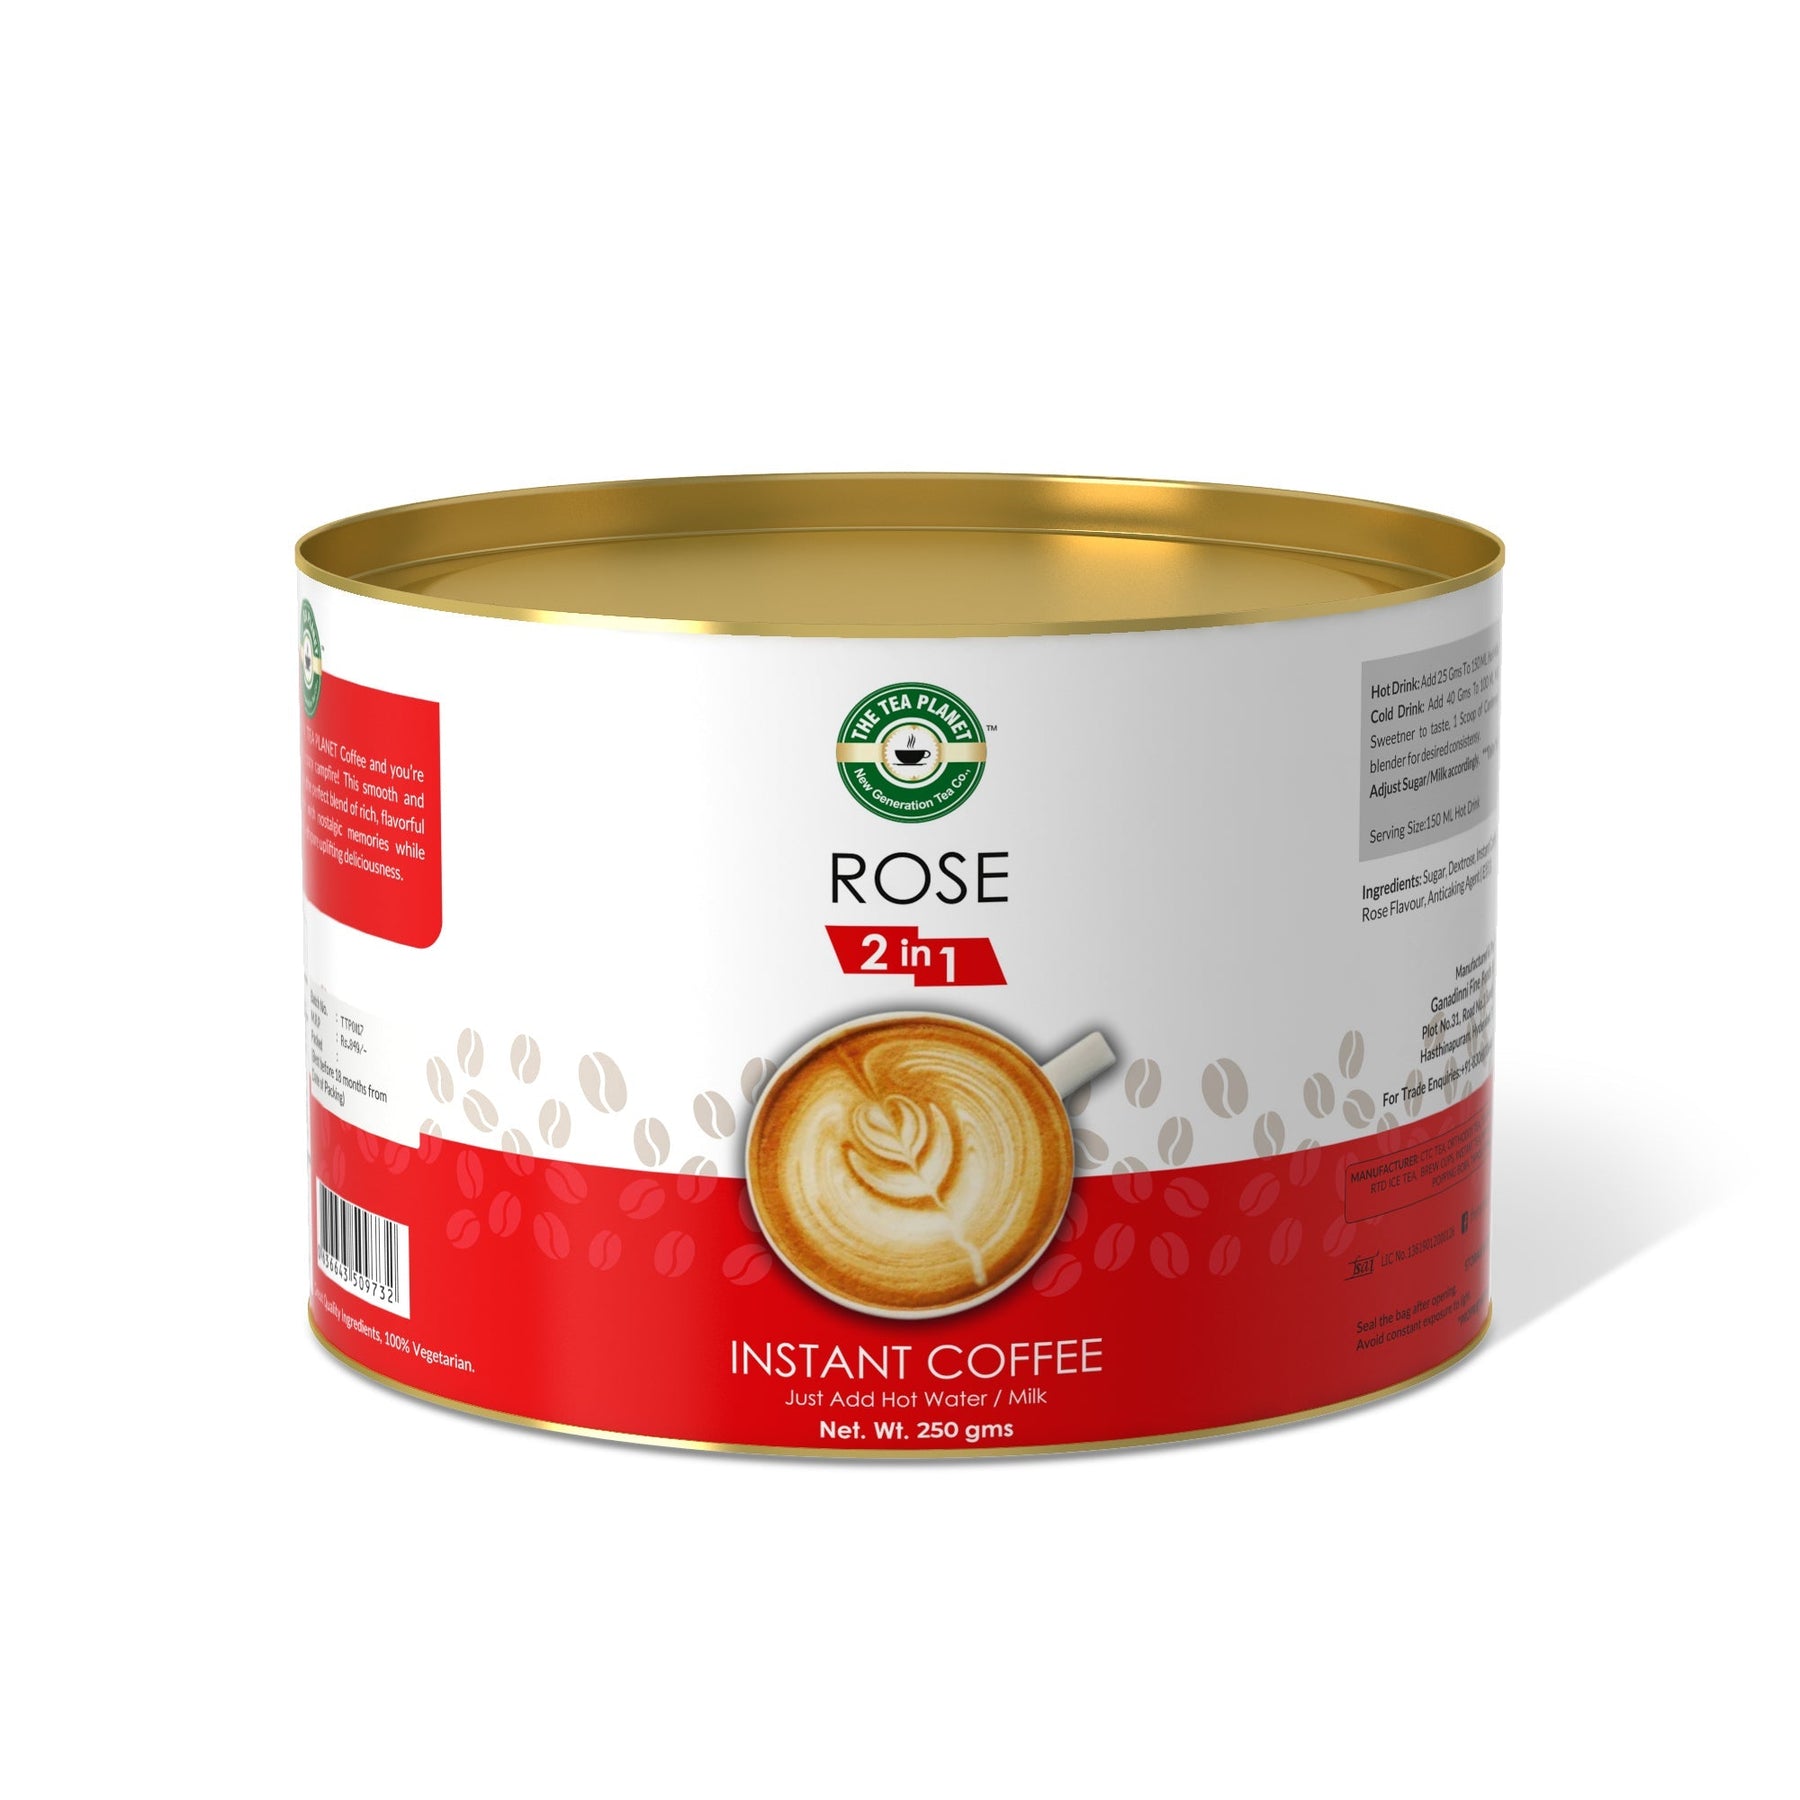 Rose Instant Coffee Premix (2 in 1) - 400 gms